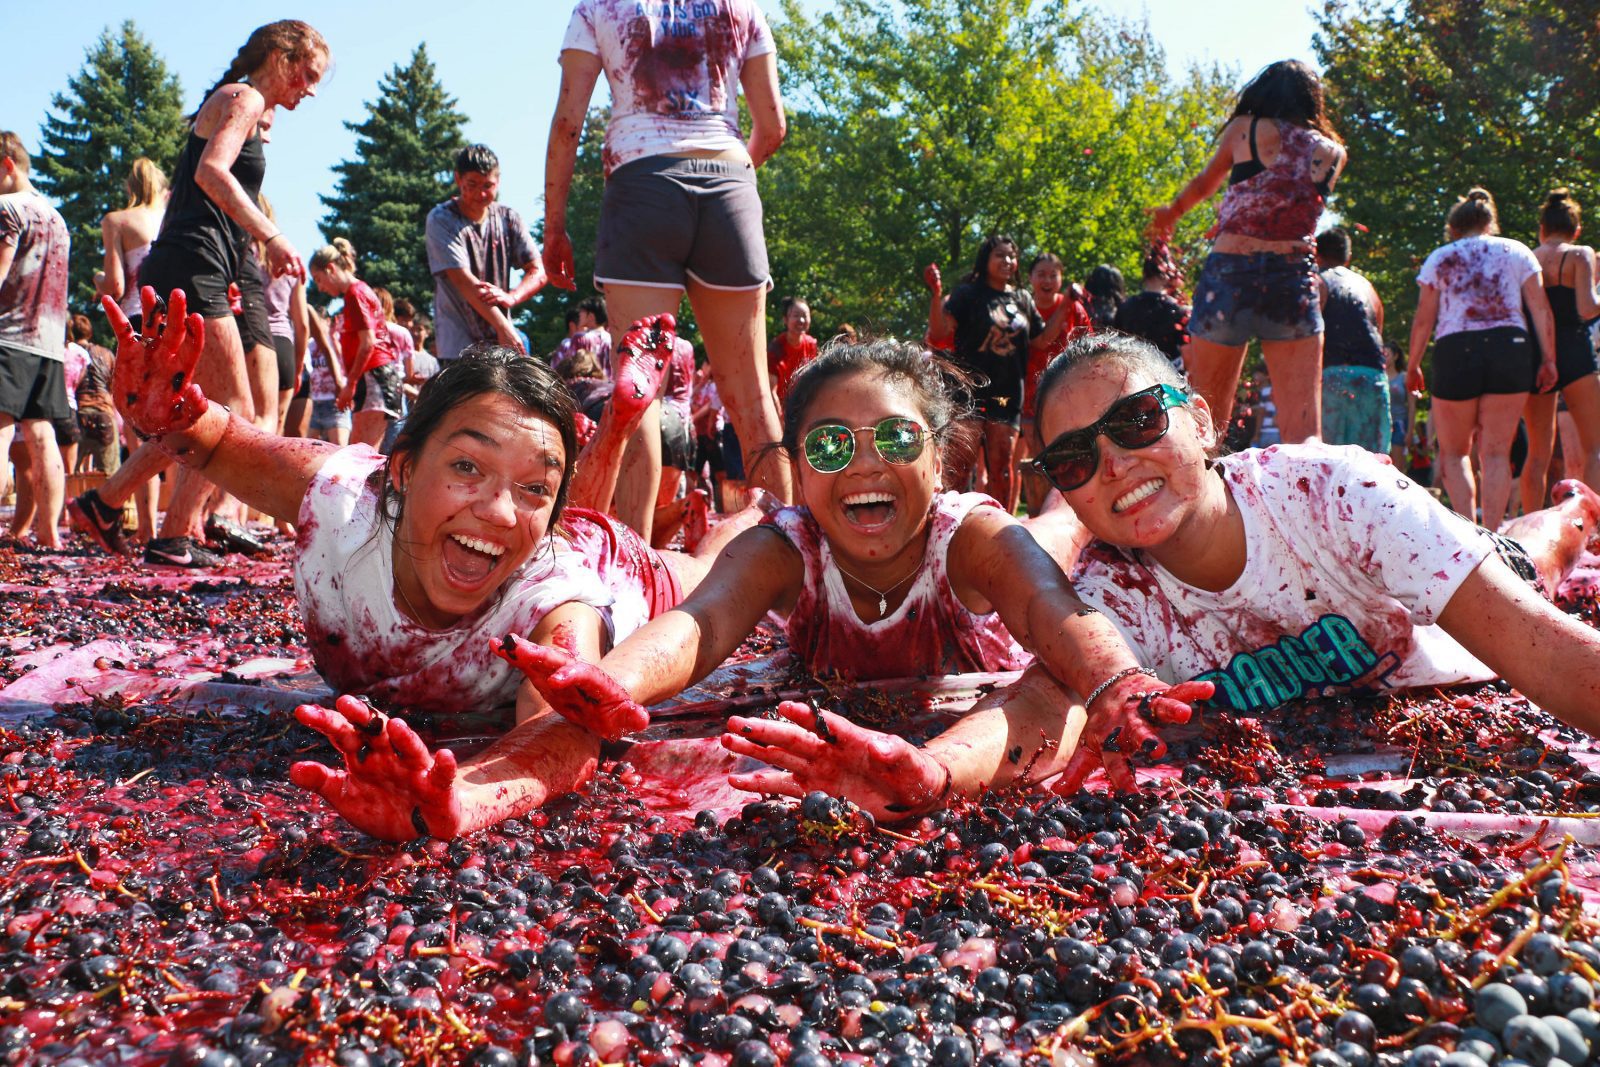 Three women smile while laying on their stomachs in a pile of stomped purple grapes.